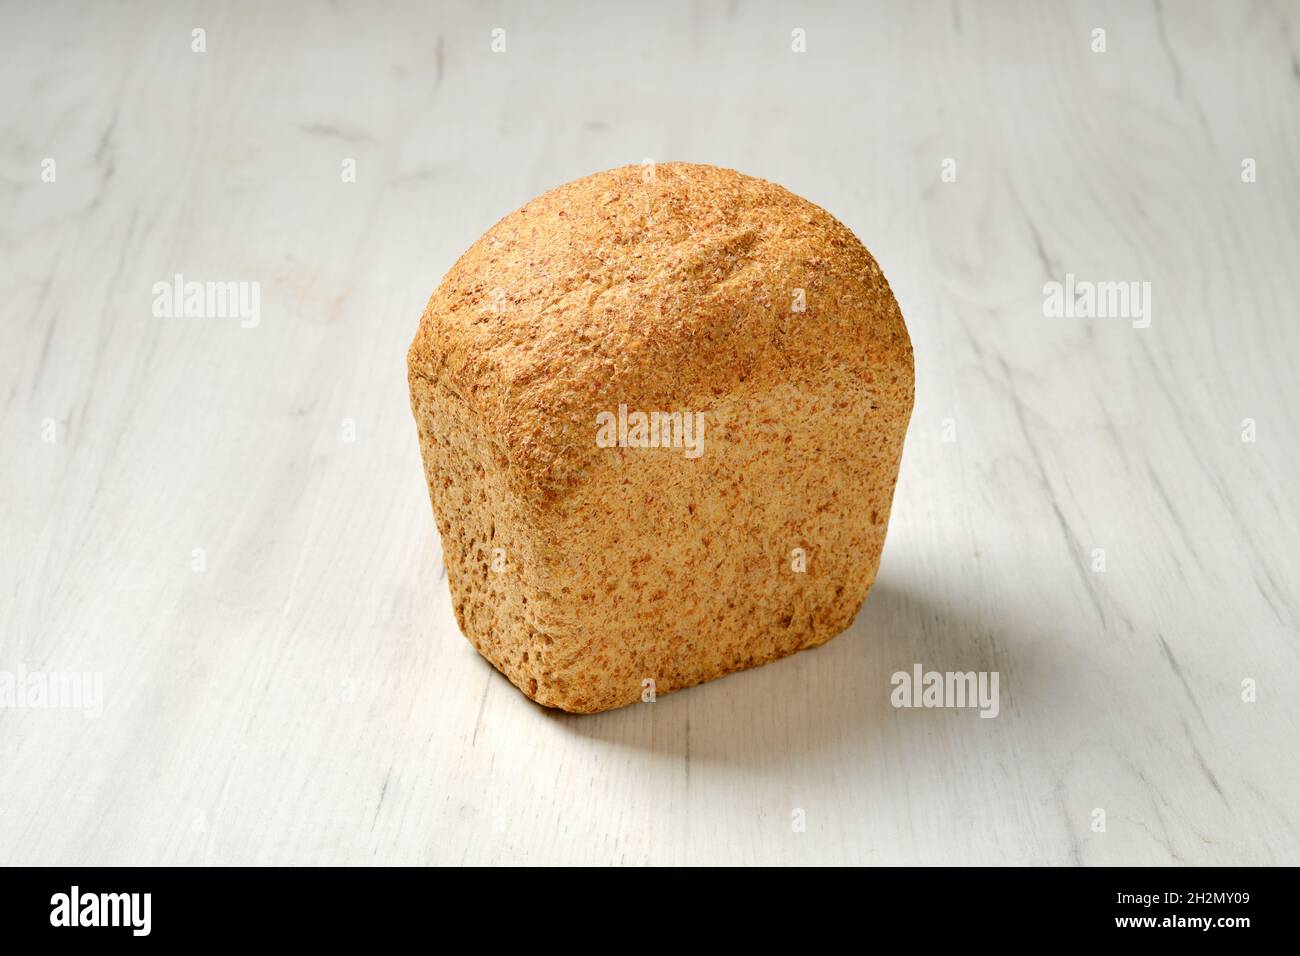 Artisan bread made from oats seeds on kitchen table Stock Photo